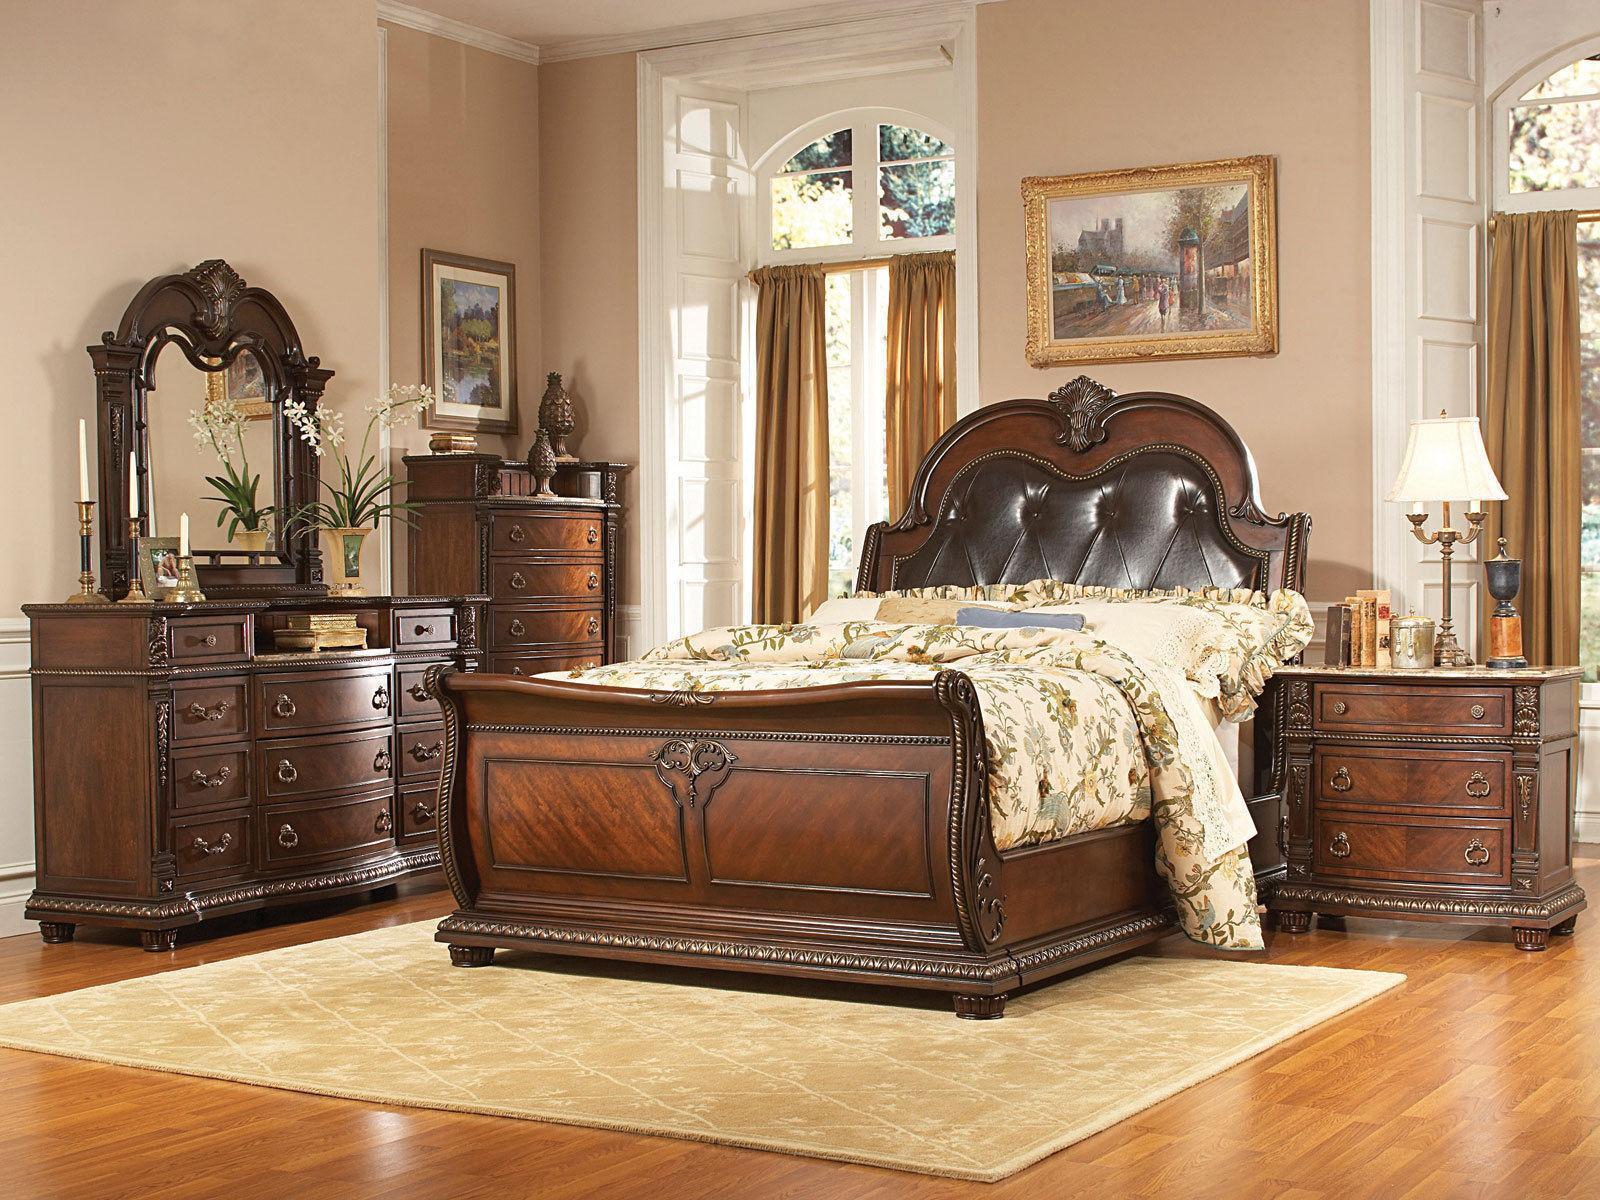 brown faux leather bedroom furniture